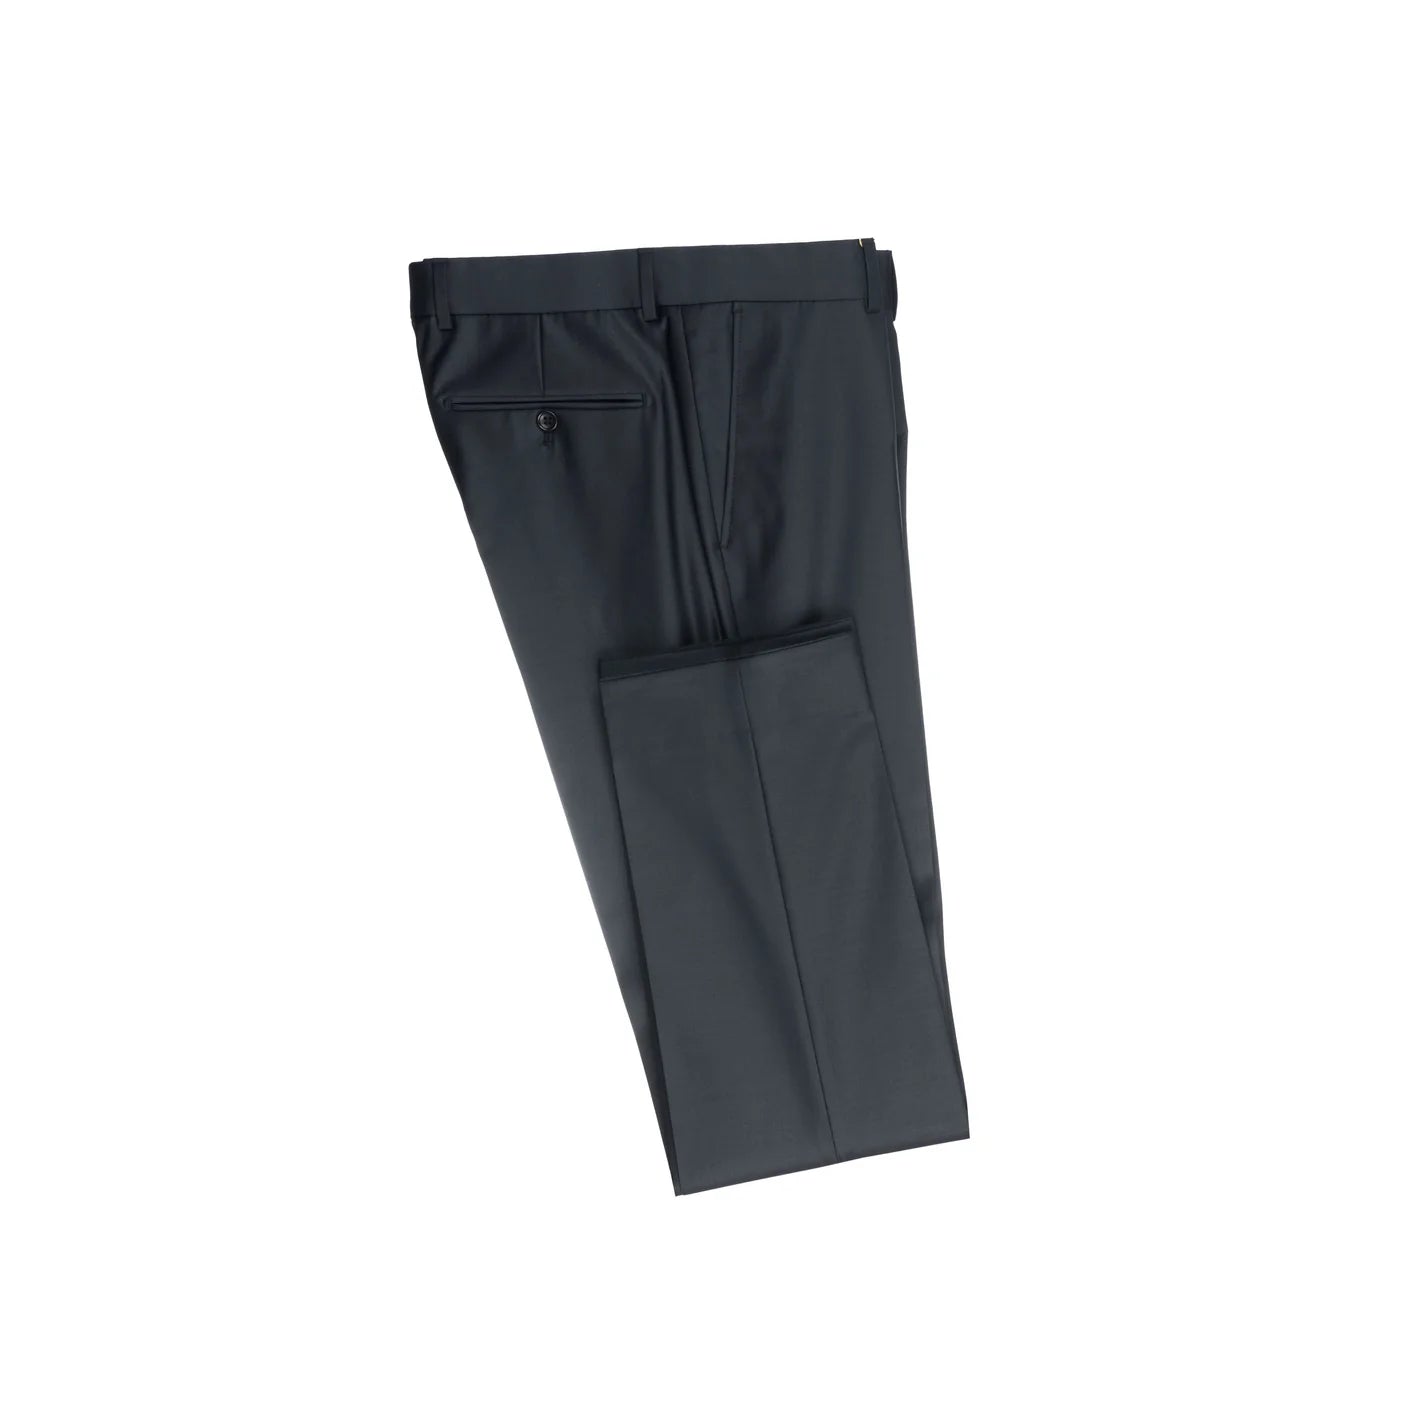 Men's Bagozza Sirio Trousers with Piped back pocket & Slit front pockets in black (3219) - available in-store, 337 Monty Naicker Street, Durban CBD or online at Omar's Tailors & Outfitters online store.   A men's fashion curation for South African men - established in 1911.